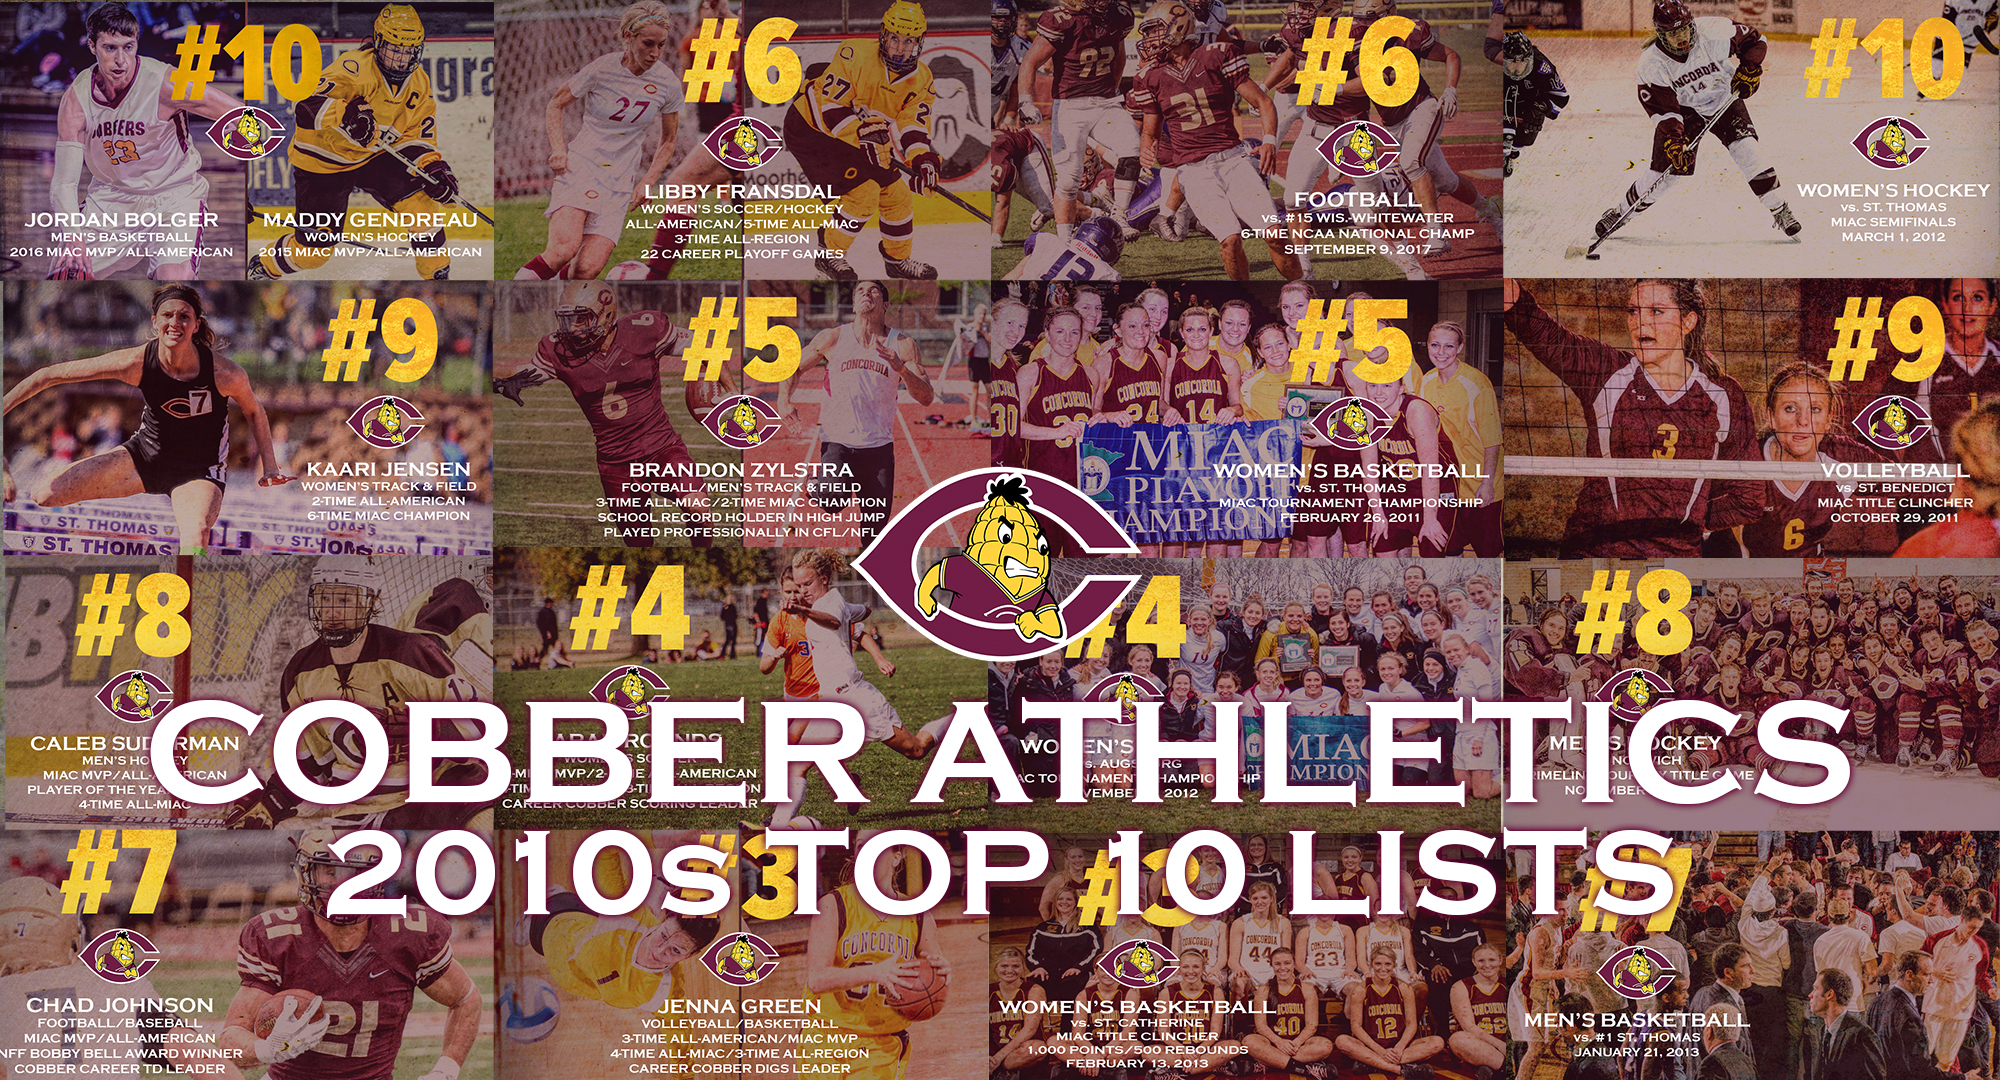 Cobber Athletics Top 10 Lists from the 2010s